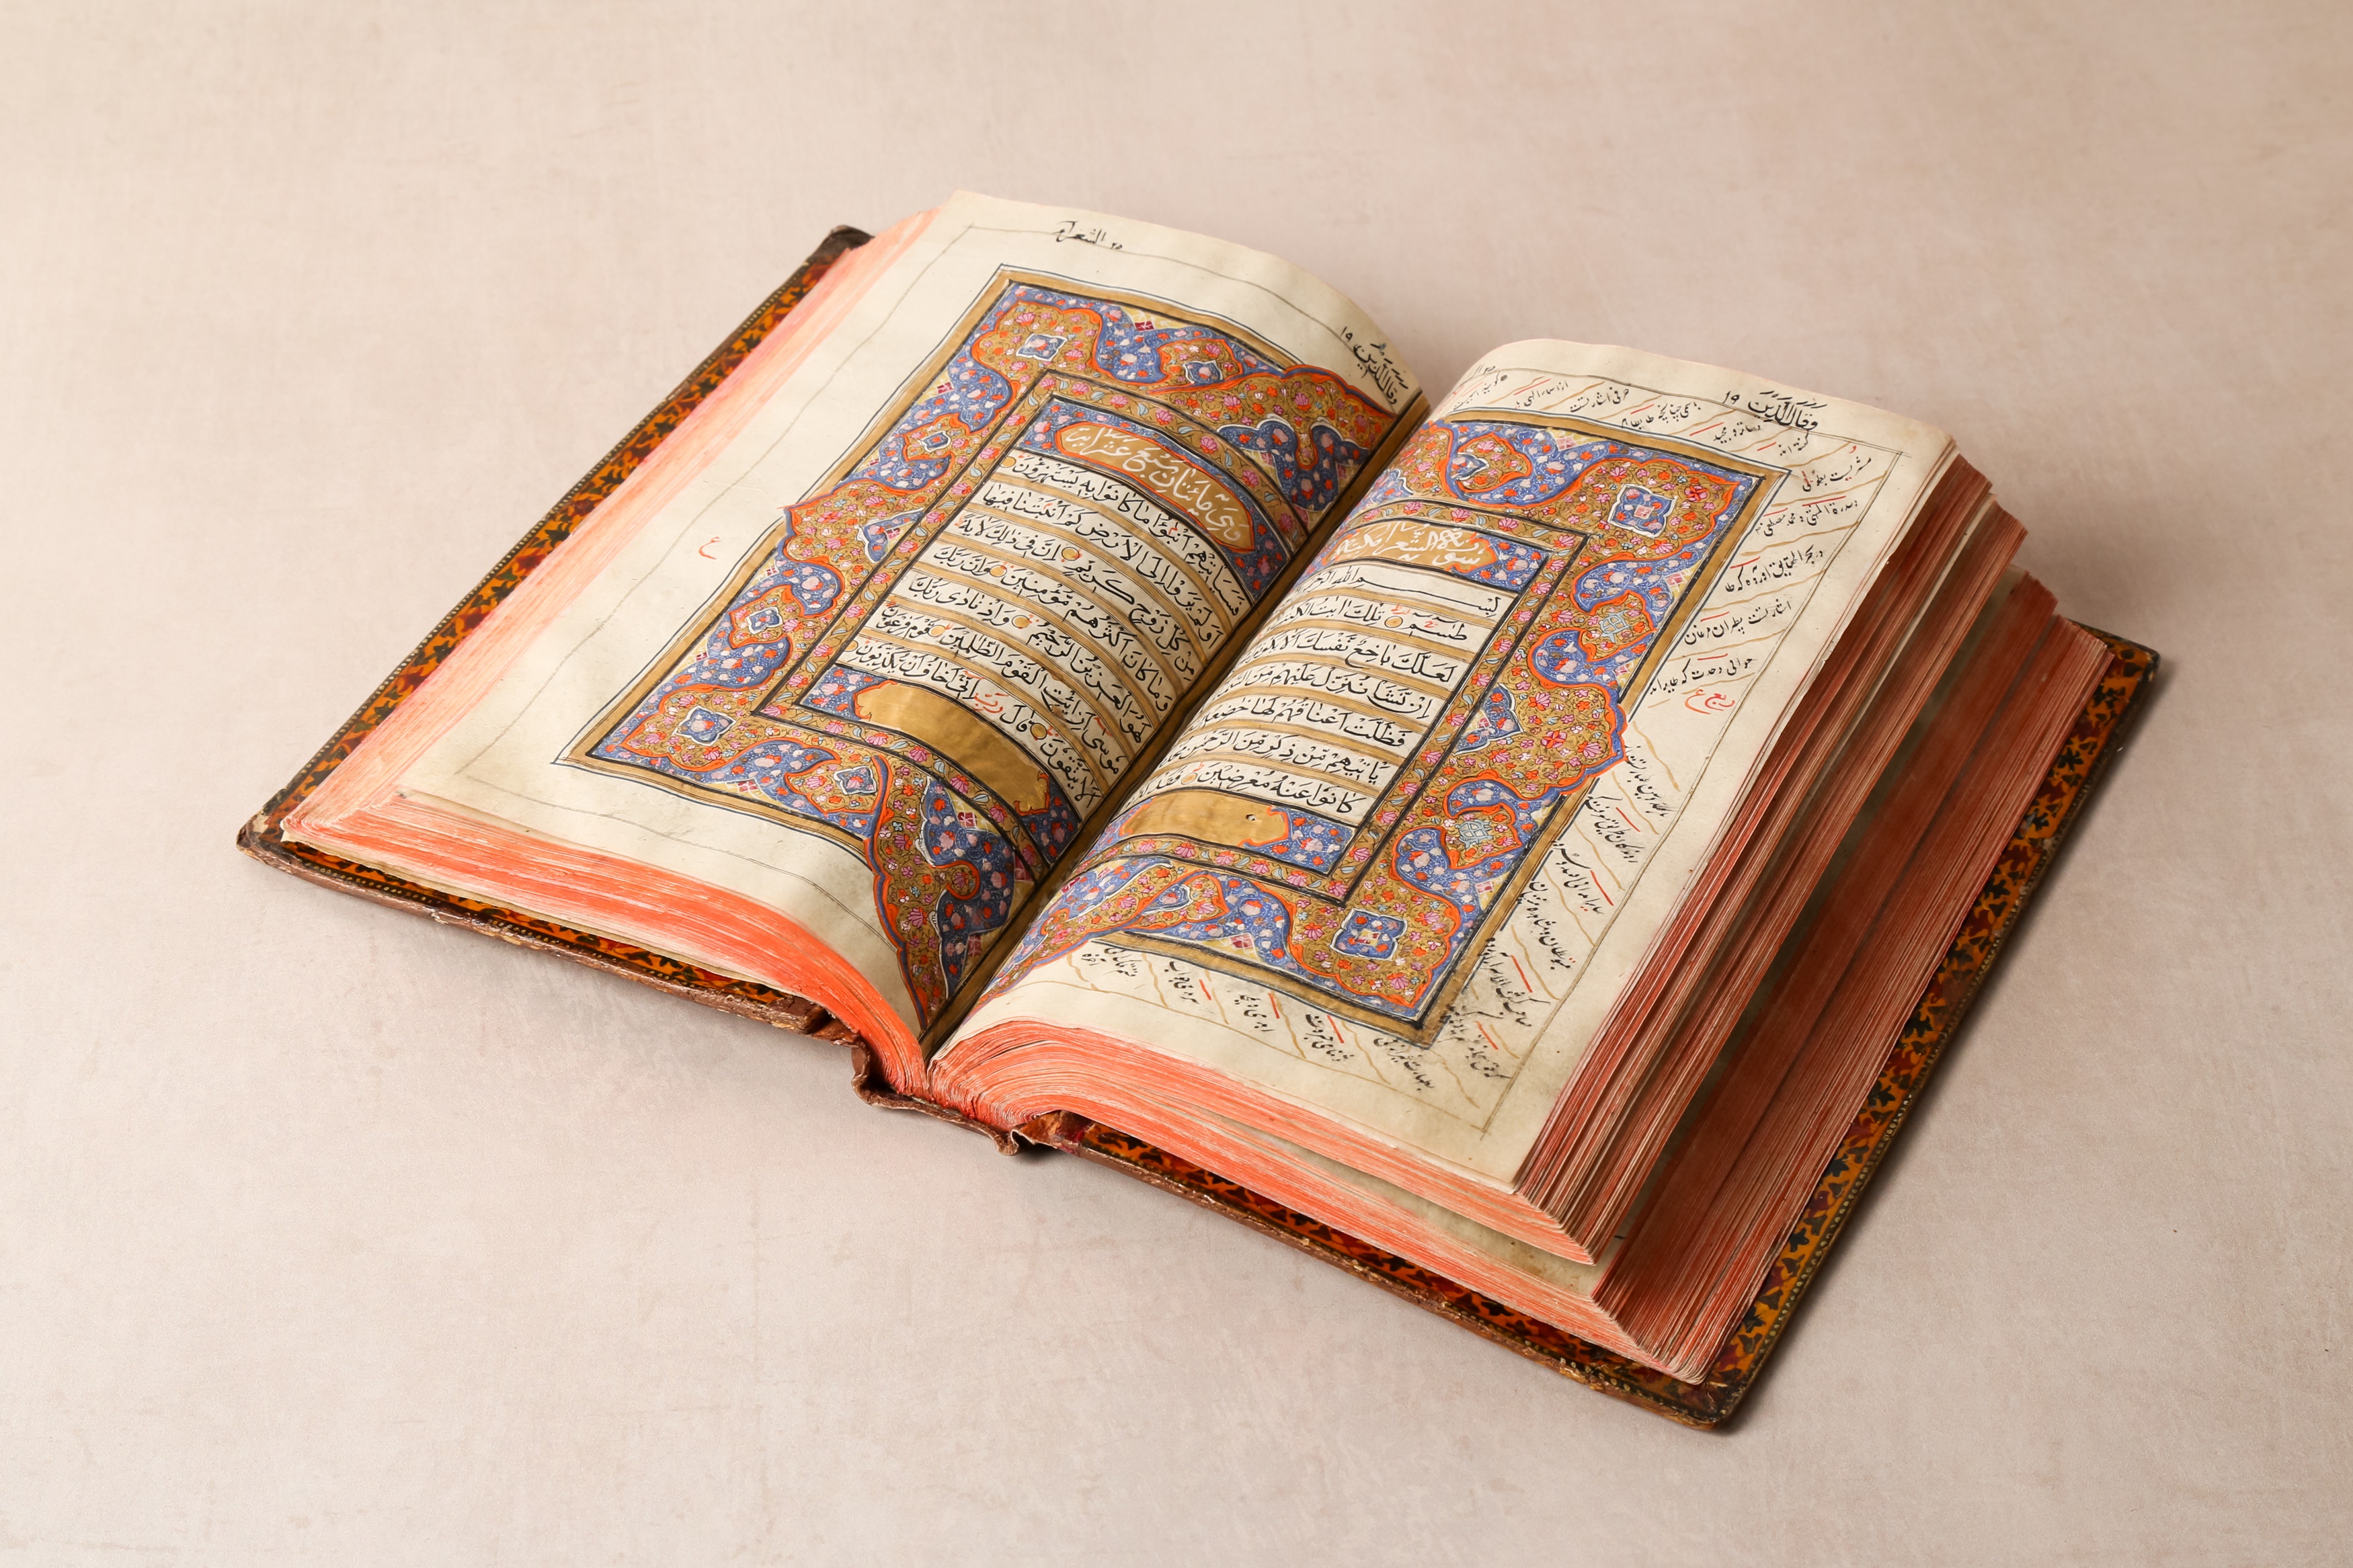 AN EXCEPTIONAL EARLY 19TH CENTURY INDIAN ILLUMINATED QUR'AN, DATED 1222AH (1807 AD) - Image 3 of 10